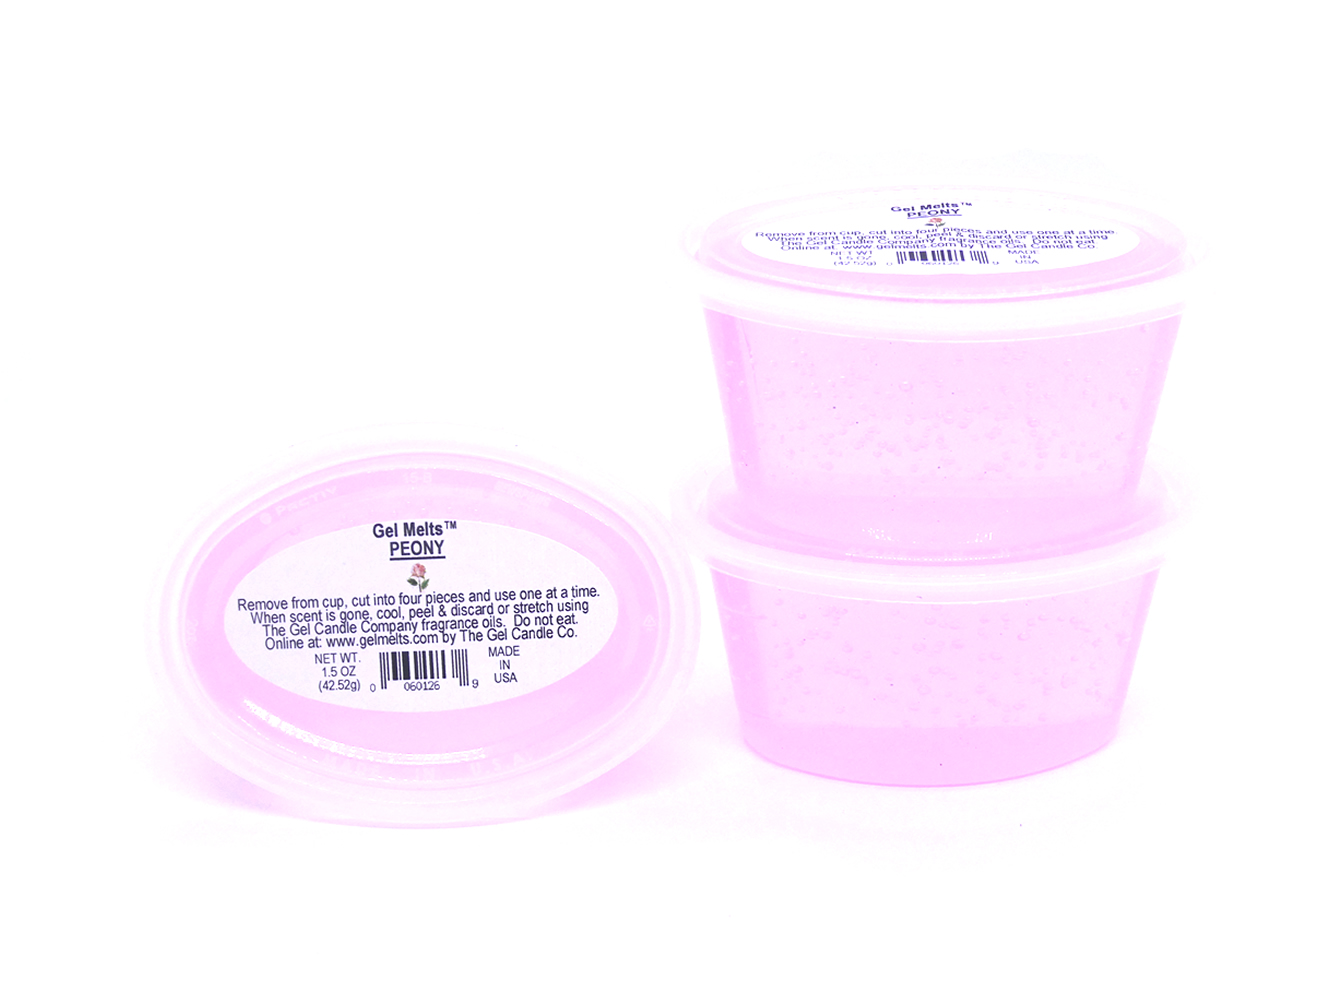 Peony scented Gel Melts™ for warmers - 3 pack - Click Image to Close